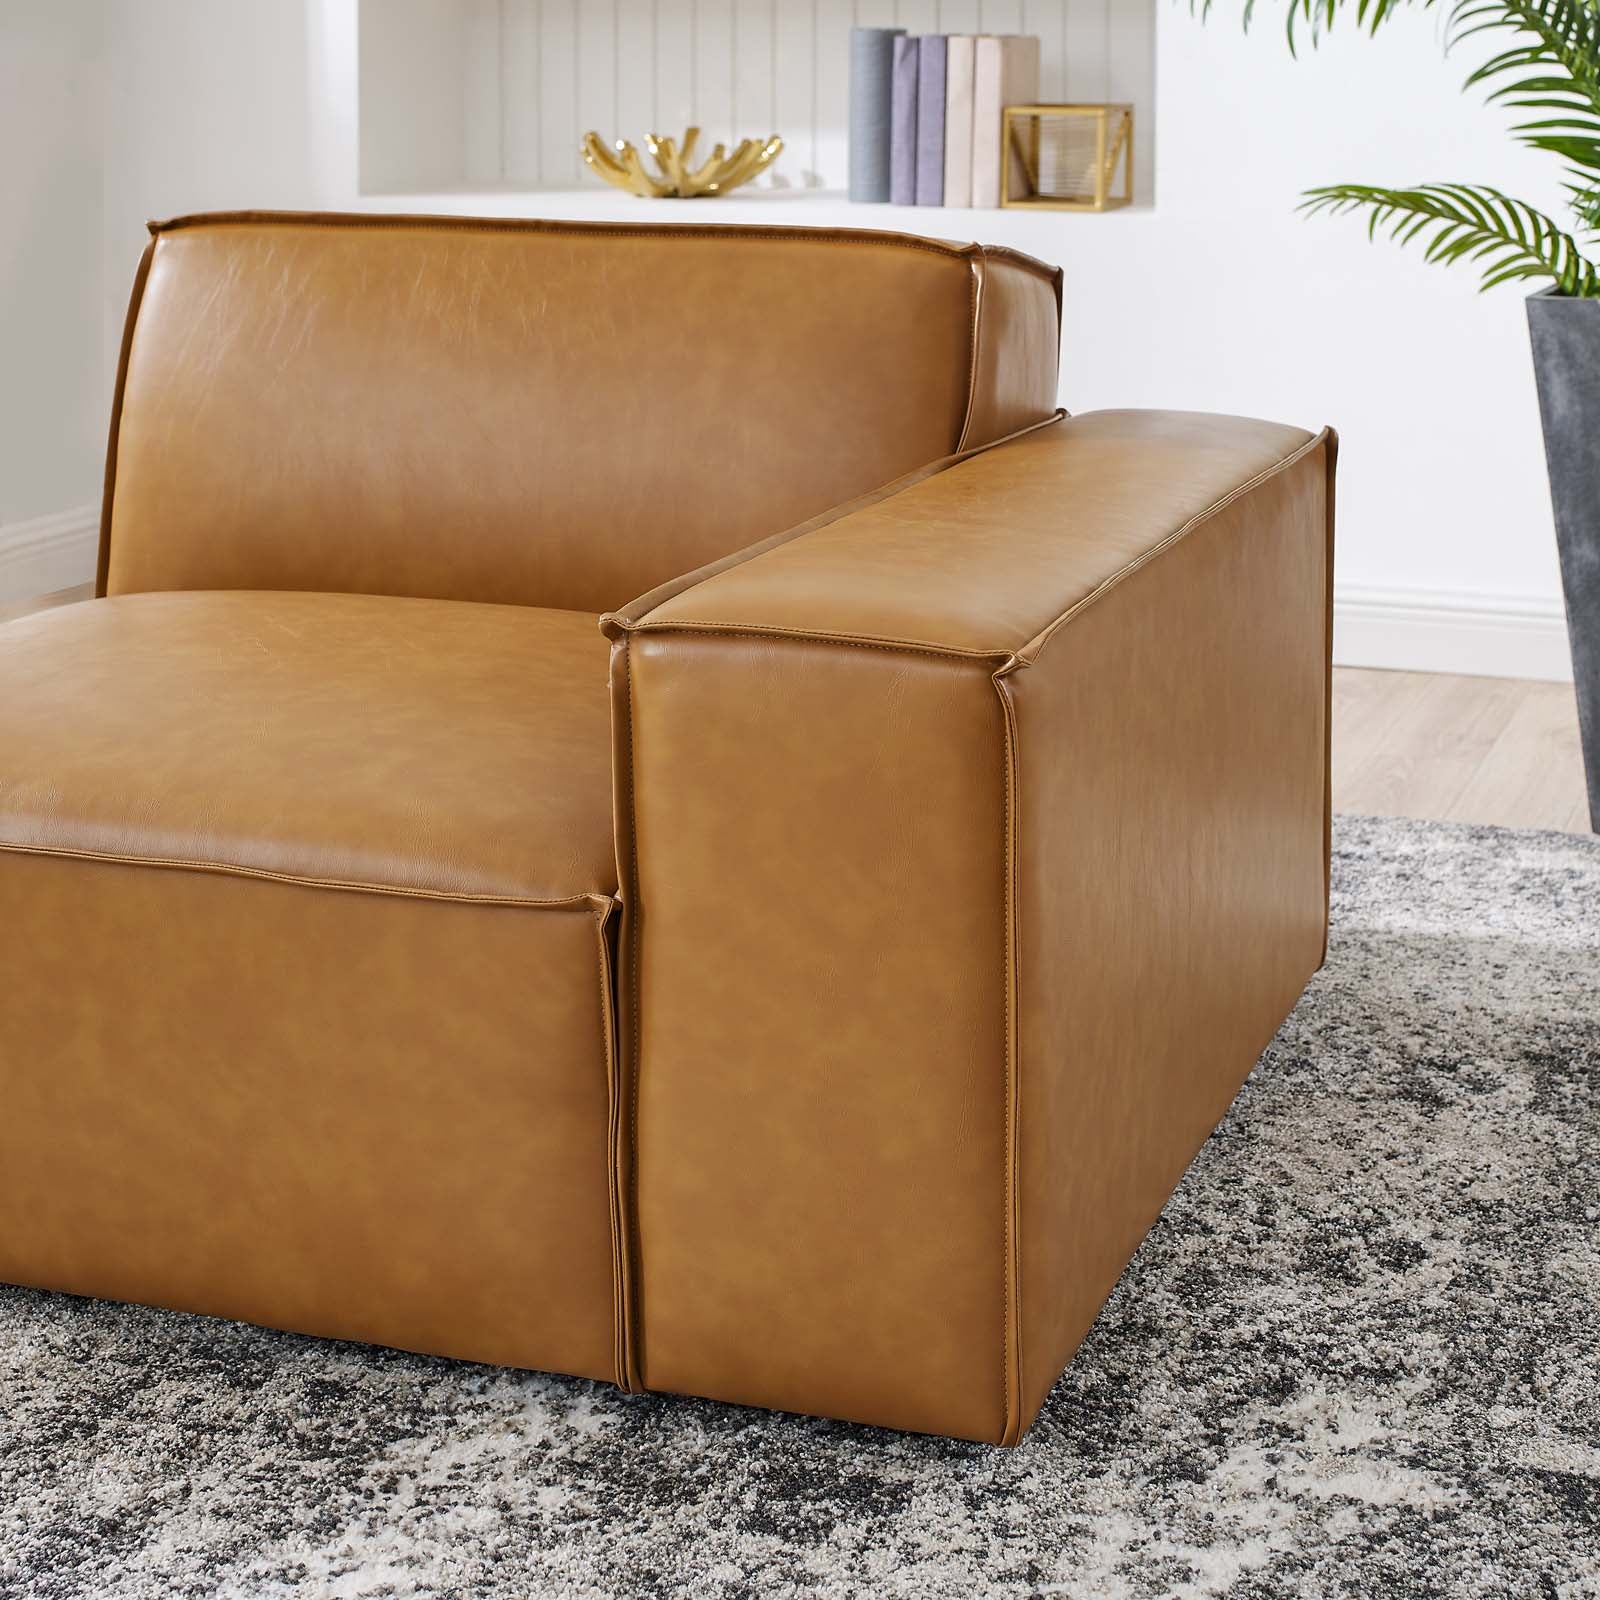 Modway Accent Chairs - Restore Right-Arm Vegan Leather Sectional Sofa Chair Tan